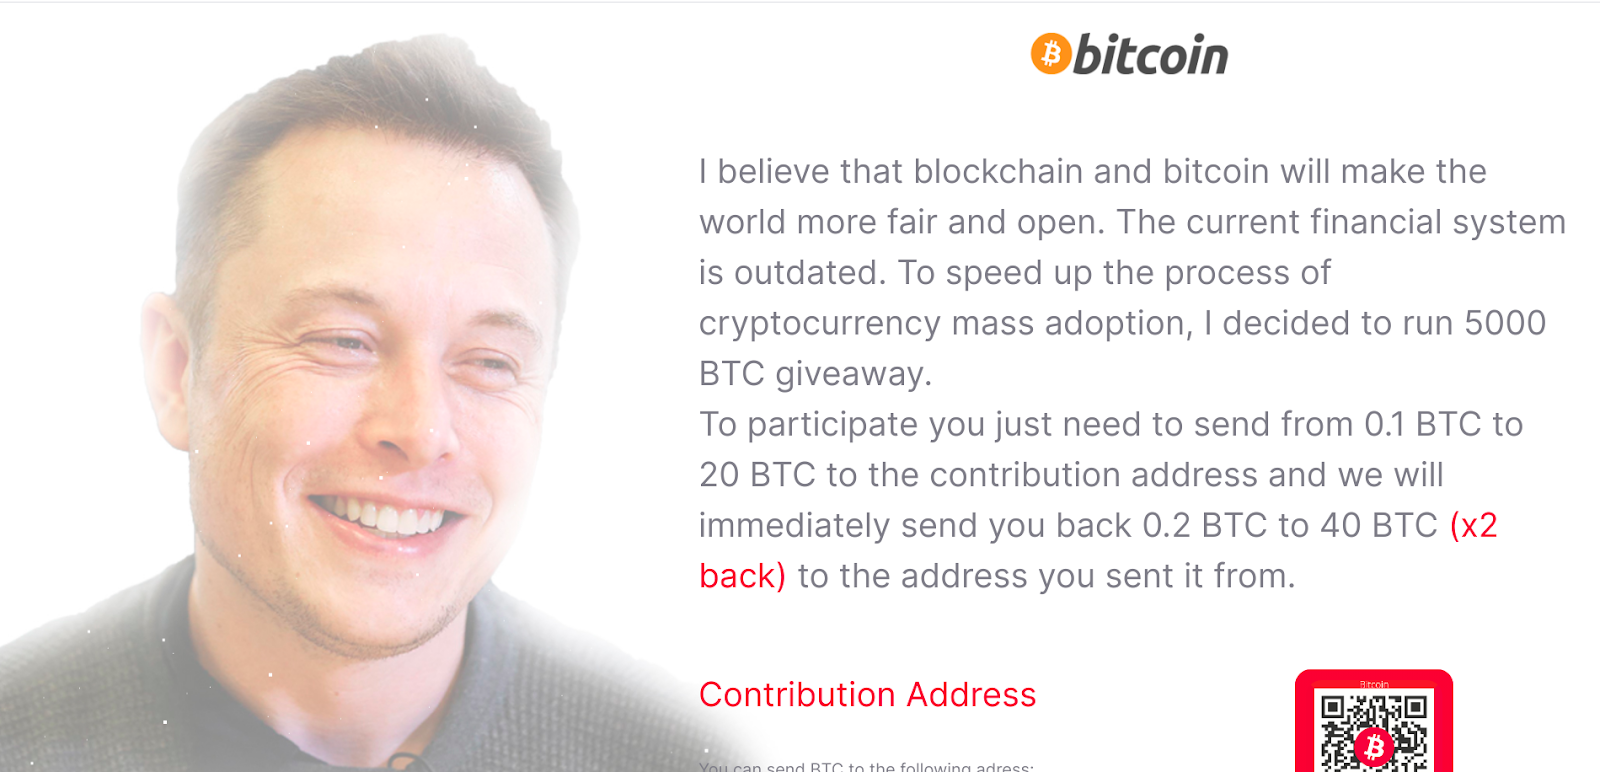 SpaceX Bitcoin Giveaway?